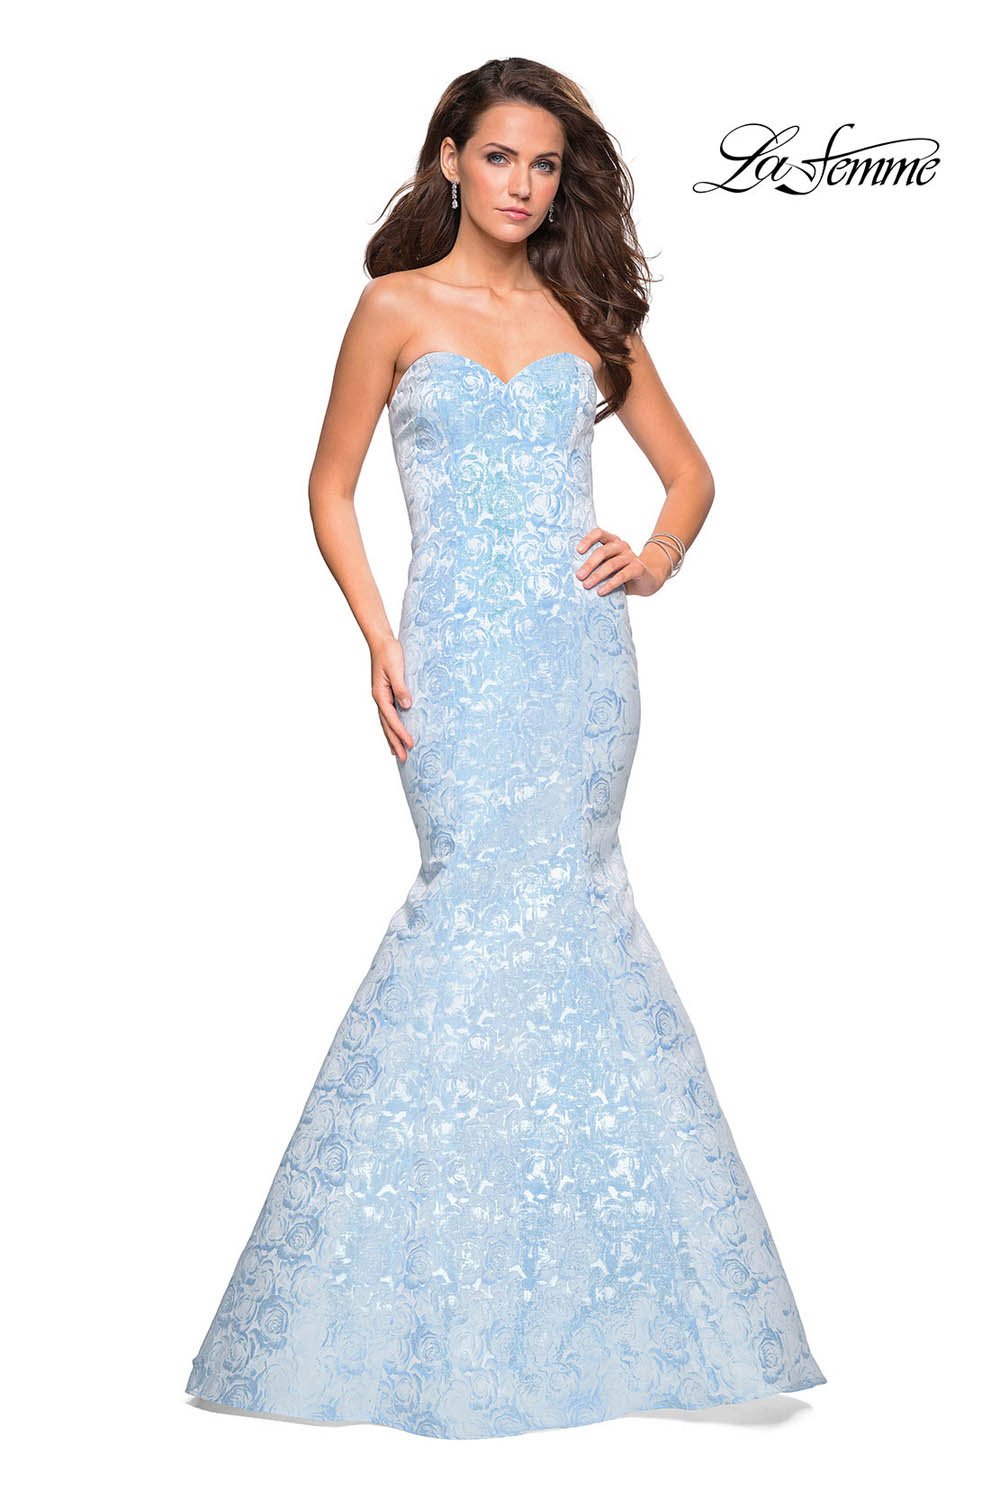 La Femme 26975 dress images in these colors: Black Silver, Light Blue, Light Pink, Yellow.